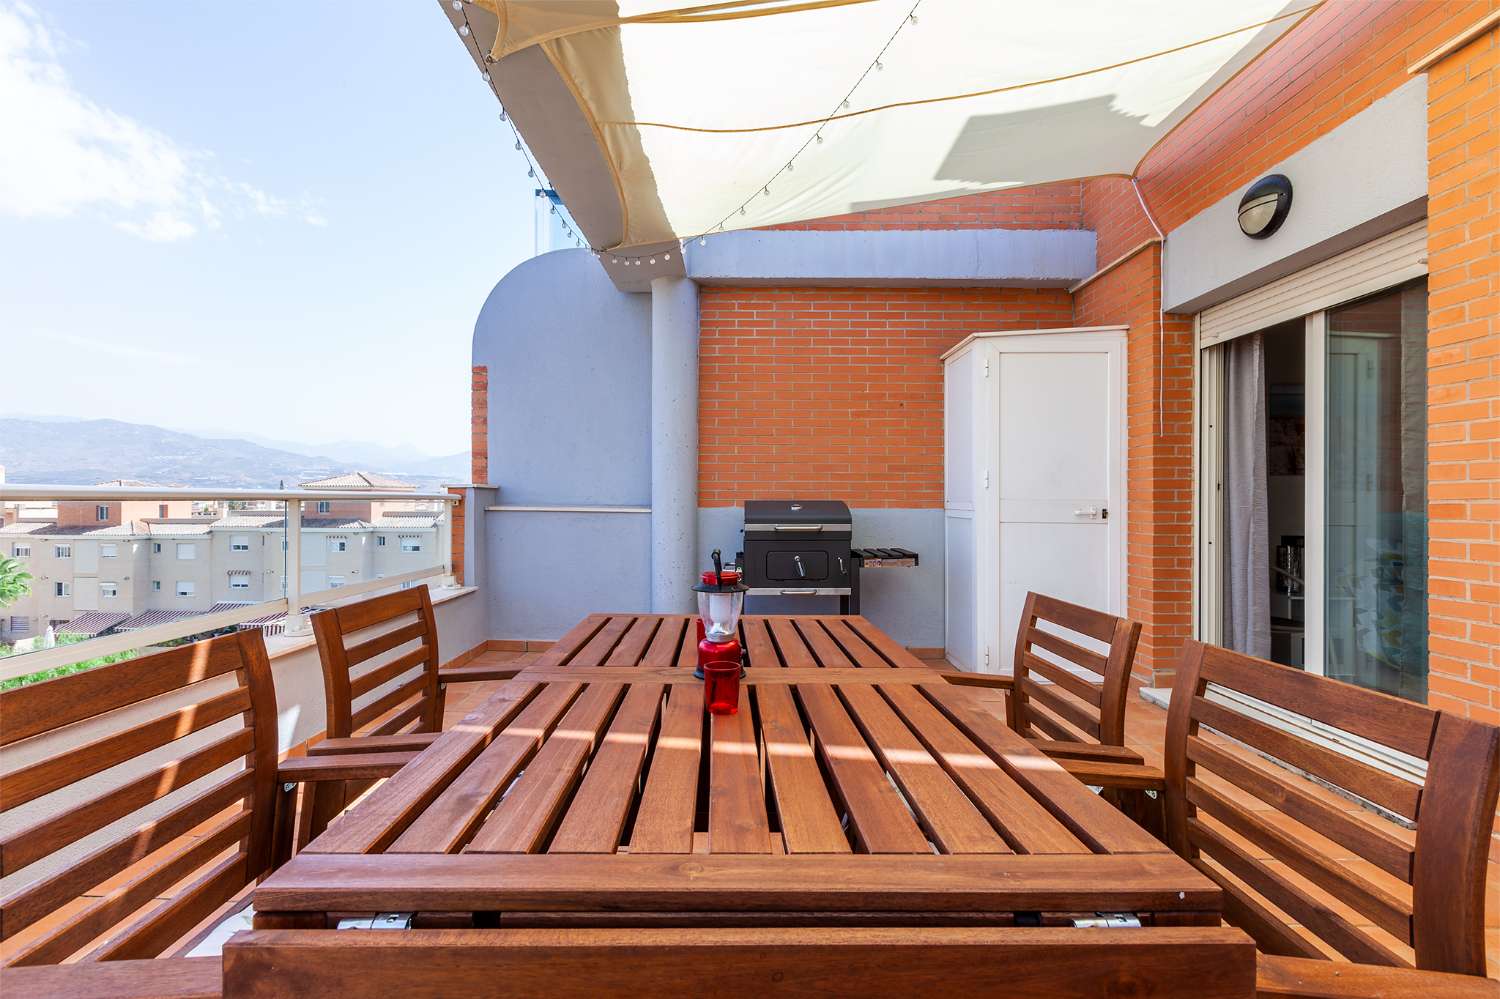 Penthouse for holidays in Torre del Mar